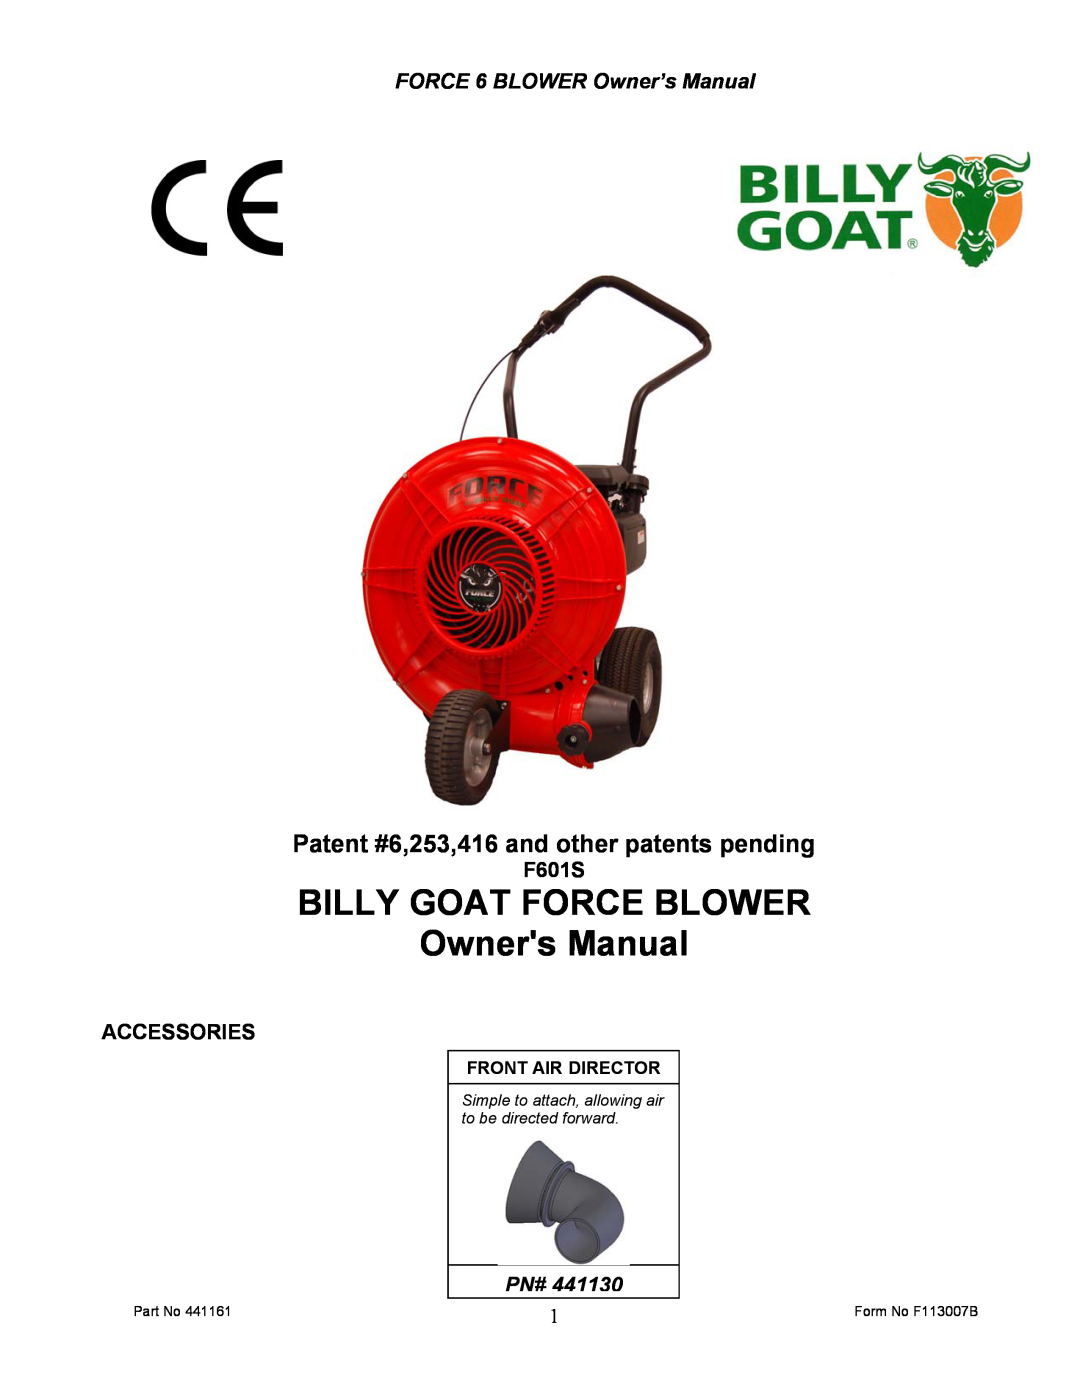 Billy Goat F601S owner manual Patent #6,253,416 and other patents pending, Accessories, Front Air Director 